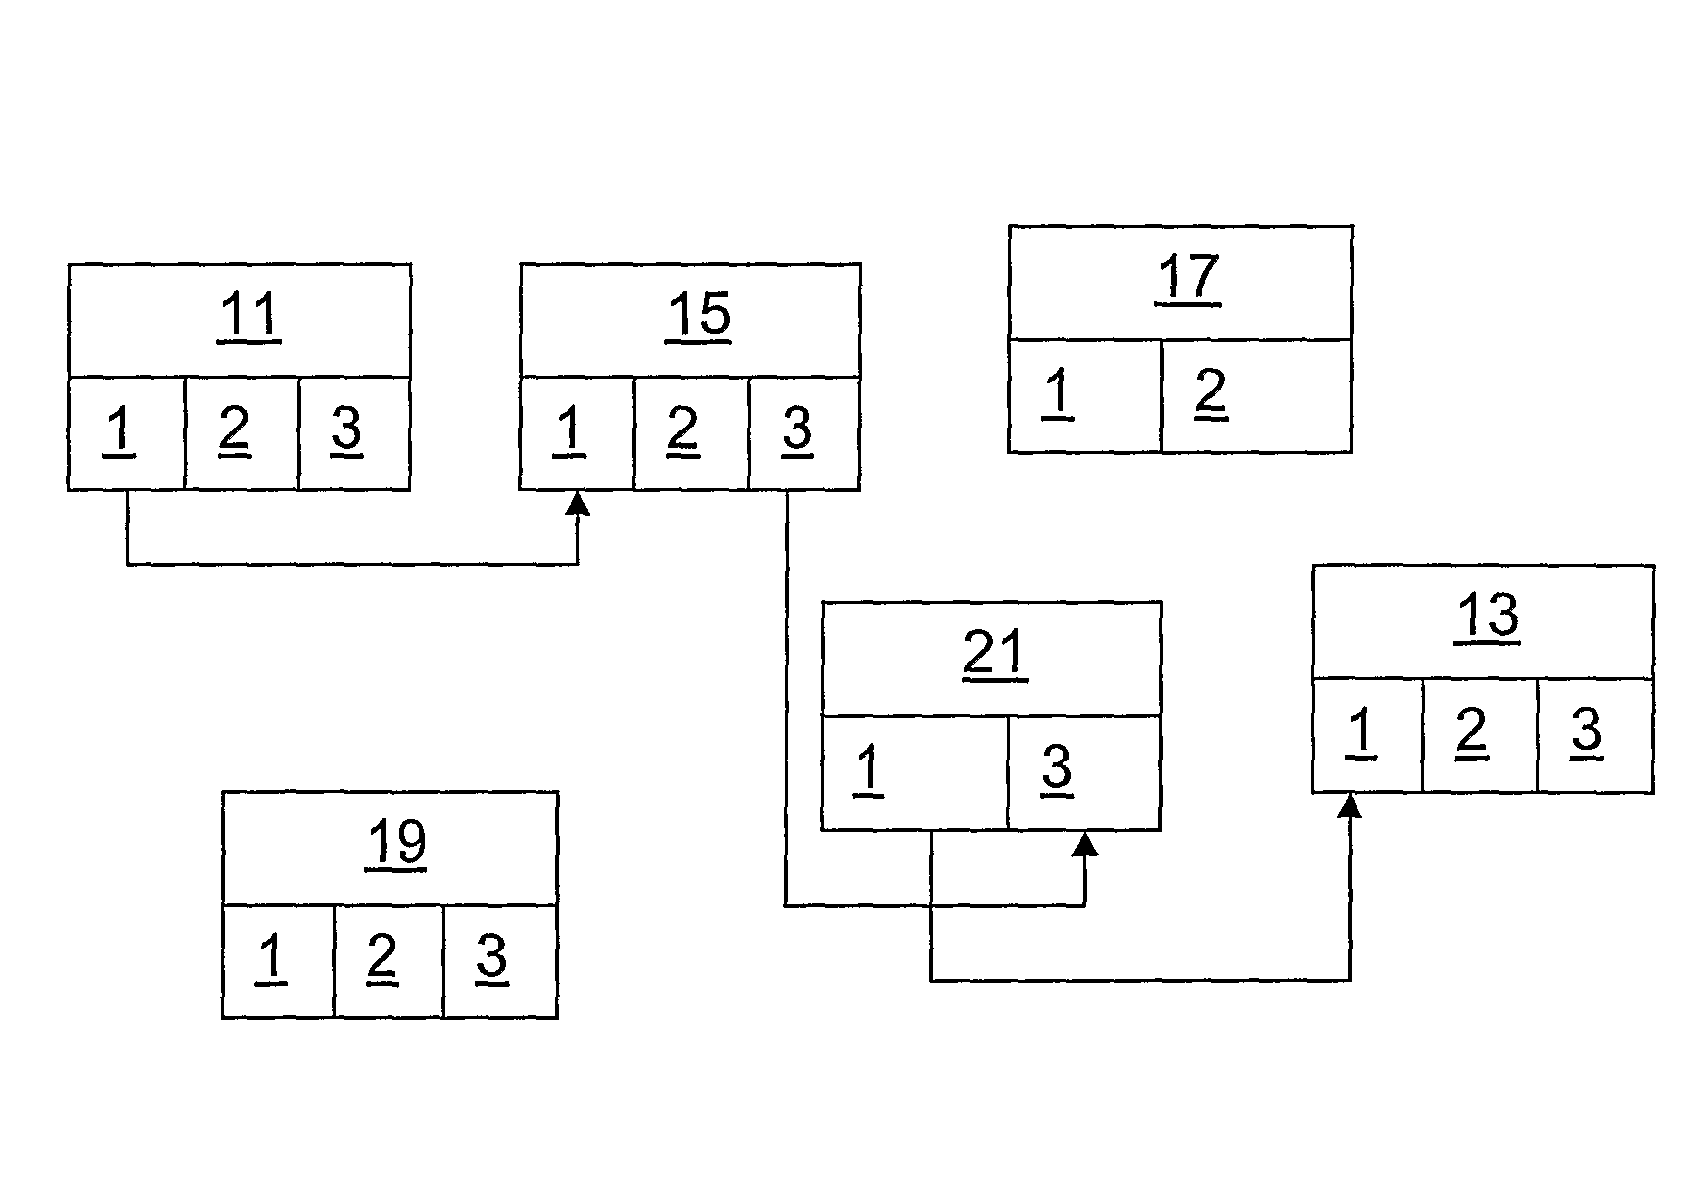 Method and apparatus for routing packets